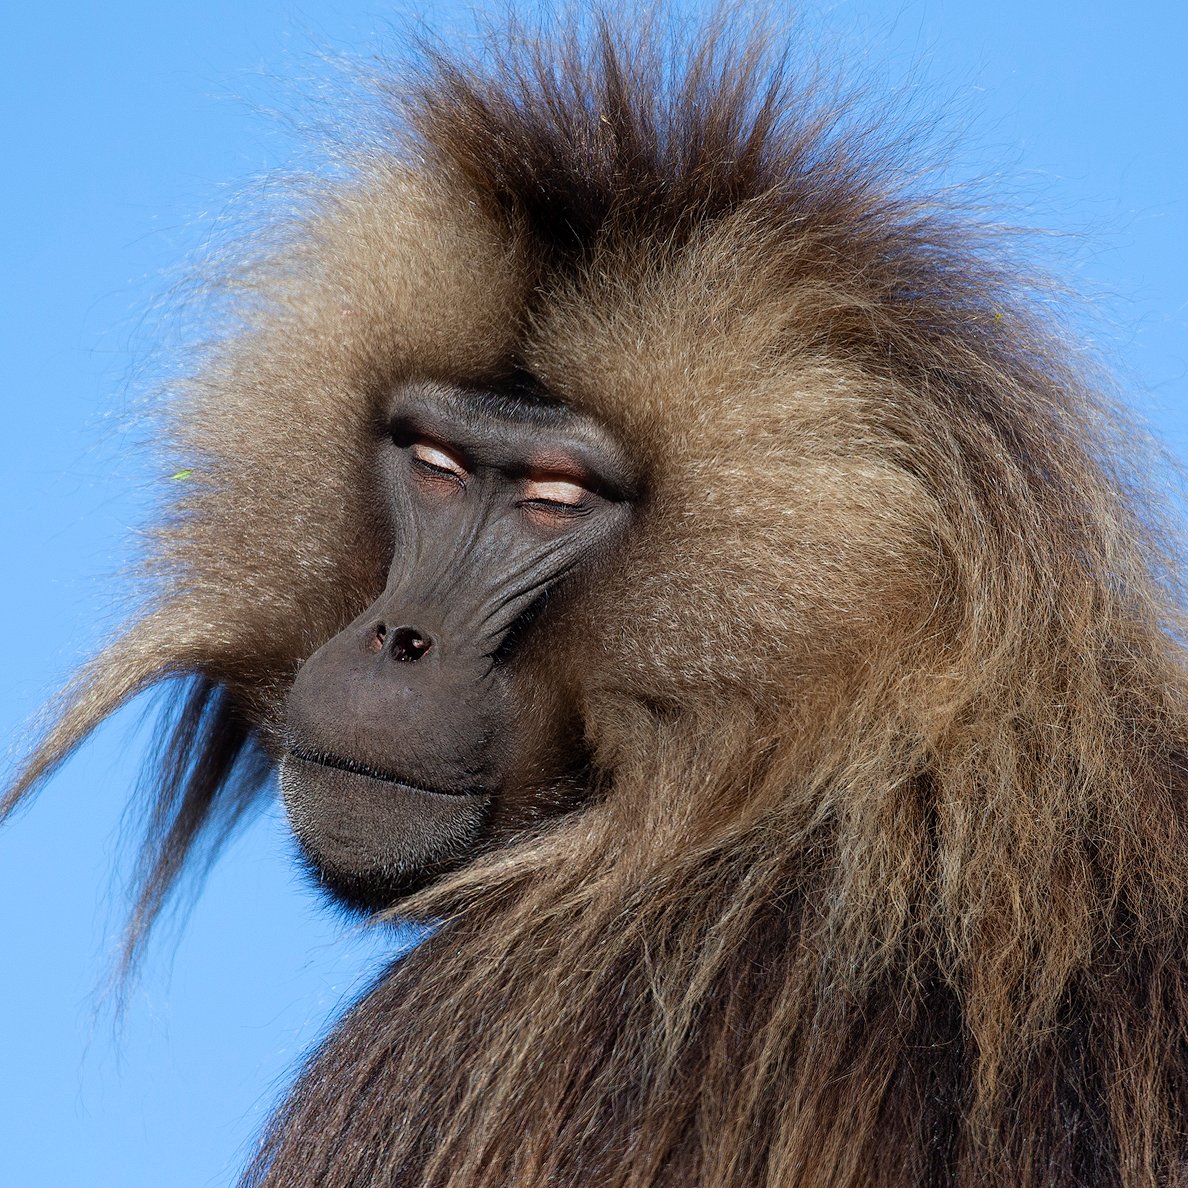 Gelada male from the Simian Mountains National Park, Ethiopia.